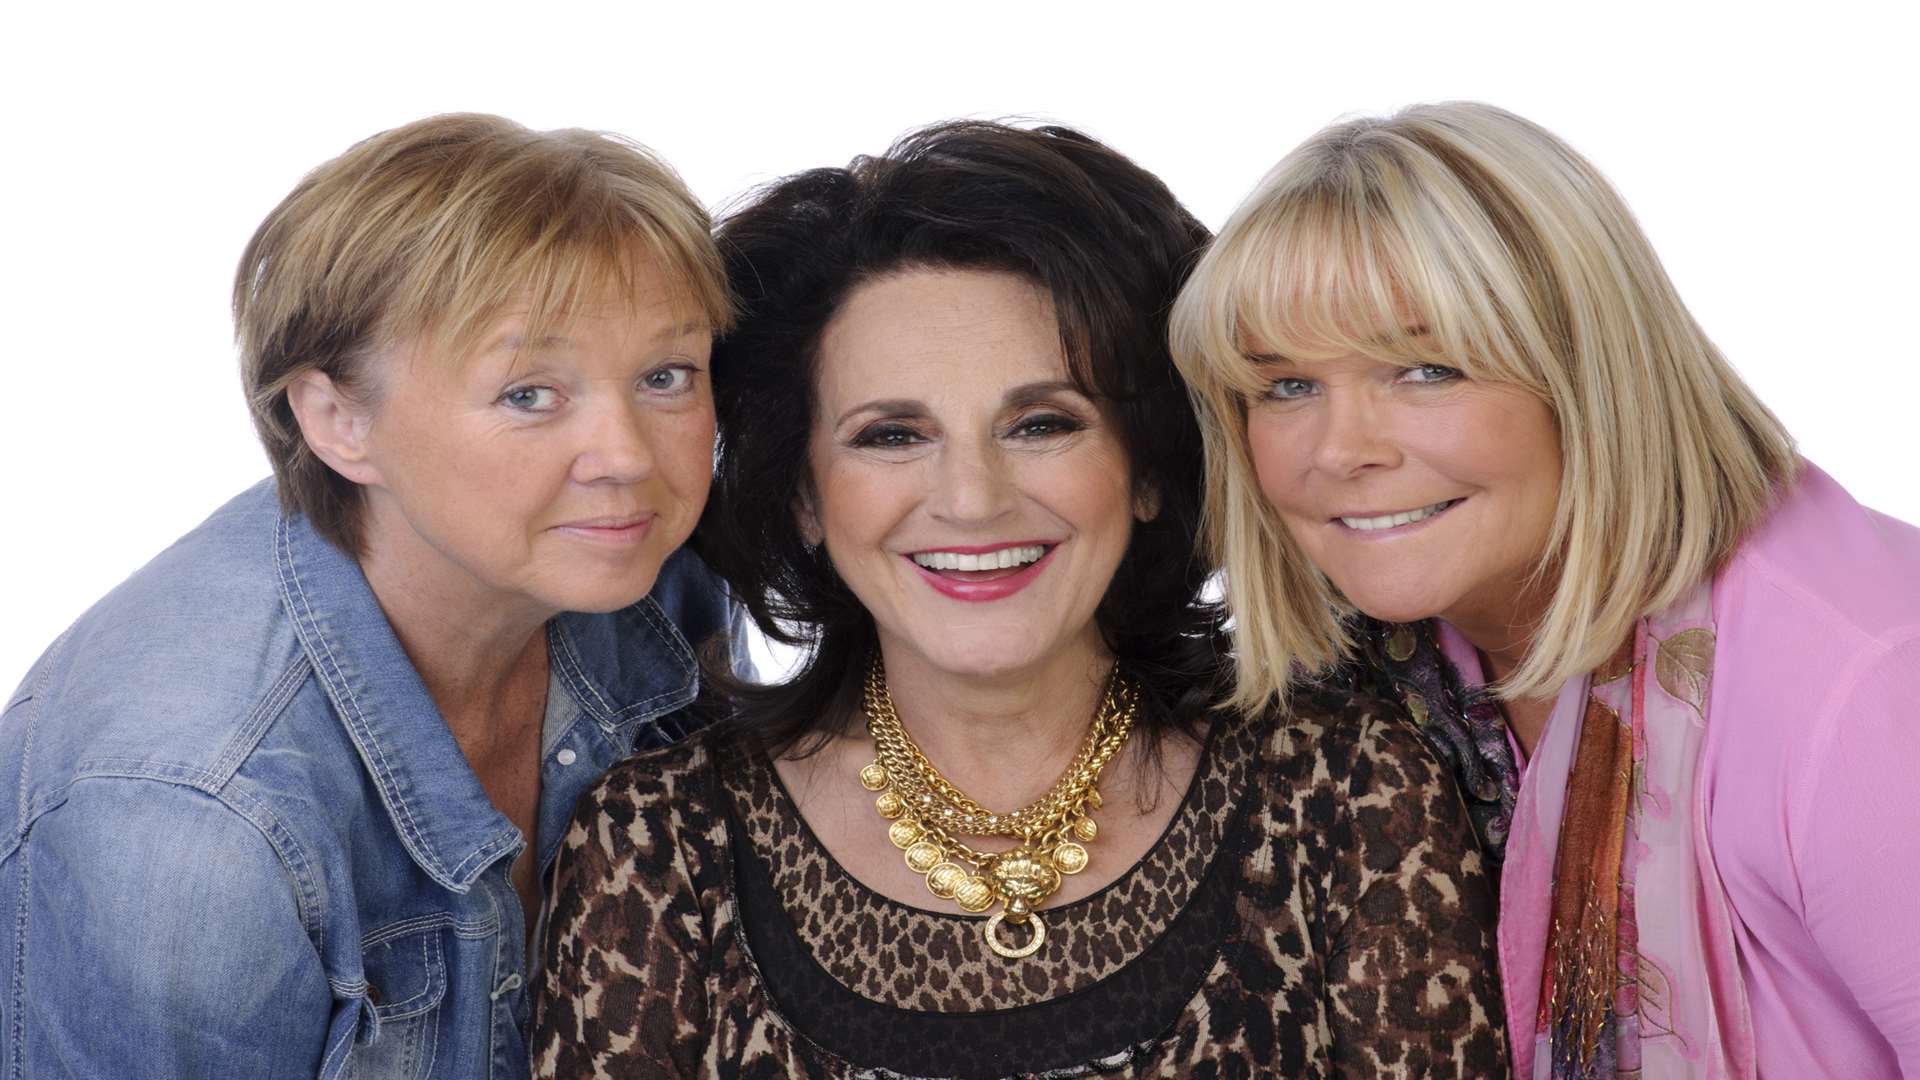 Lesley Joseph with her Birds of a Feather fellow stars Linda Robson, right, and Pauline Quirke, left